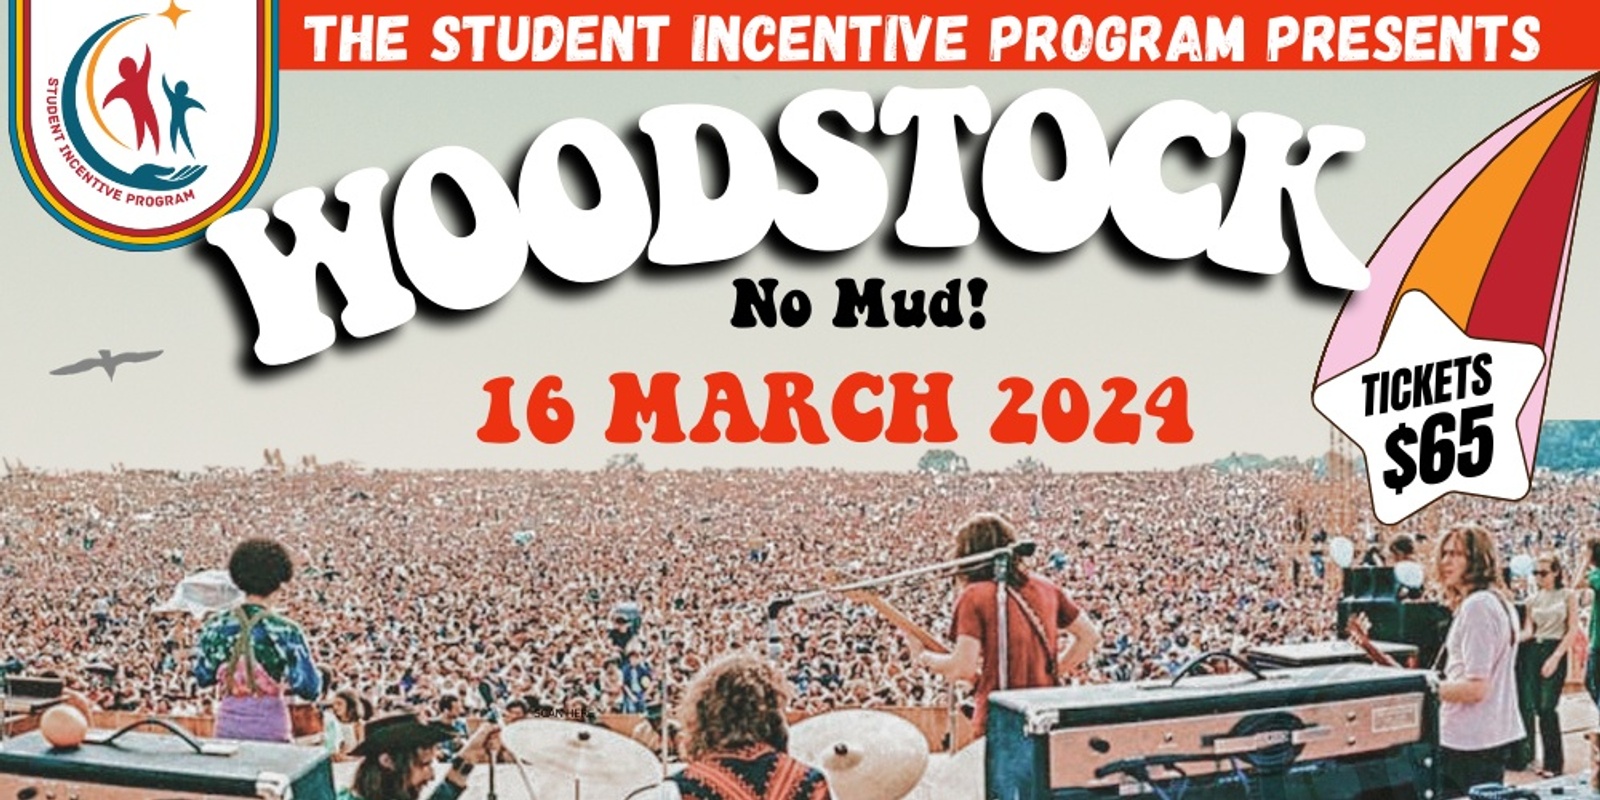 Banner image for WOODSTOCK No Mud! ***SOLD OUT***